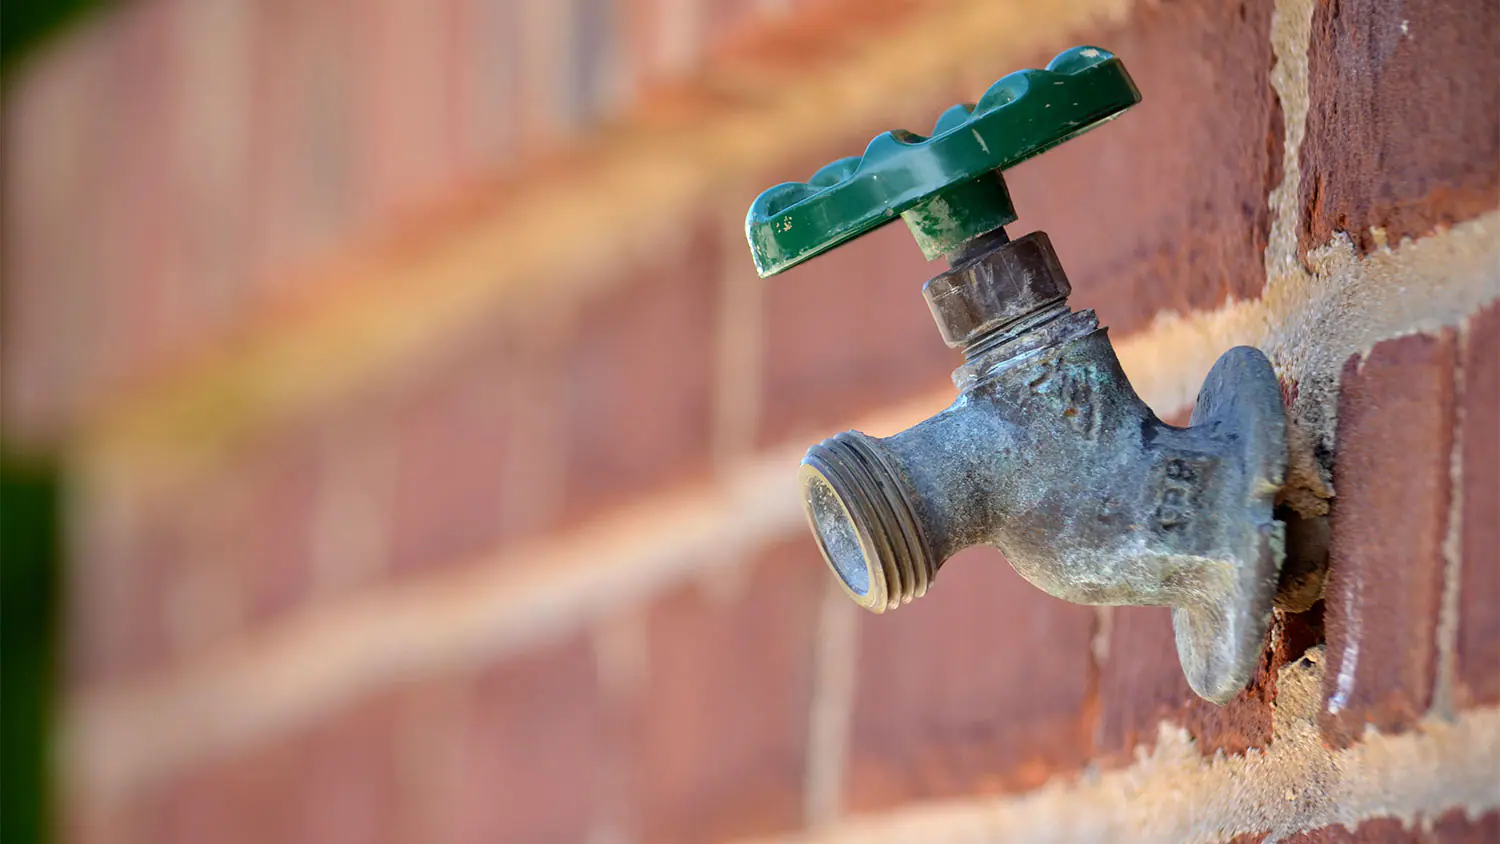 How To Fix An Outdoor Faucet